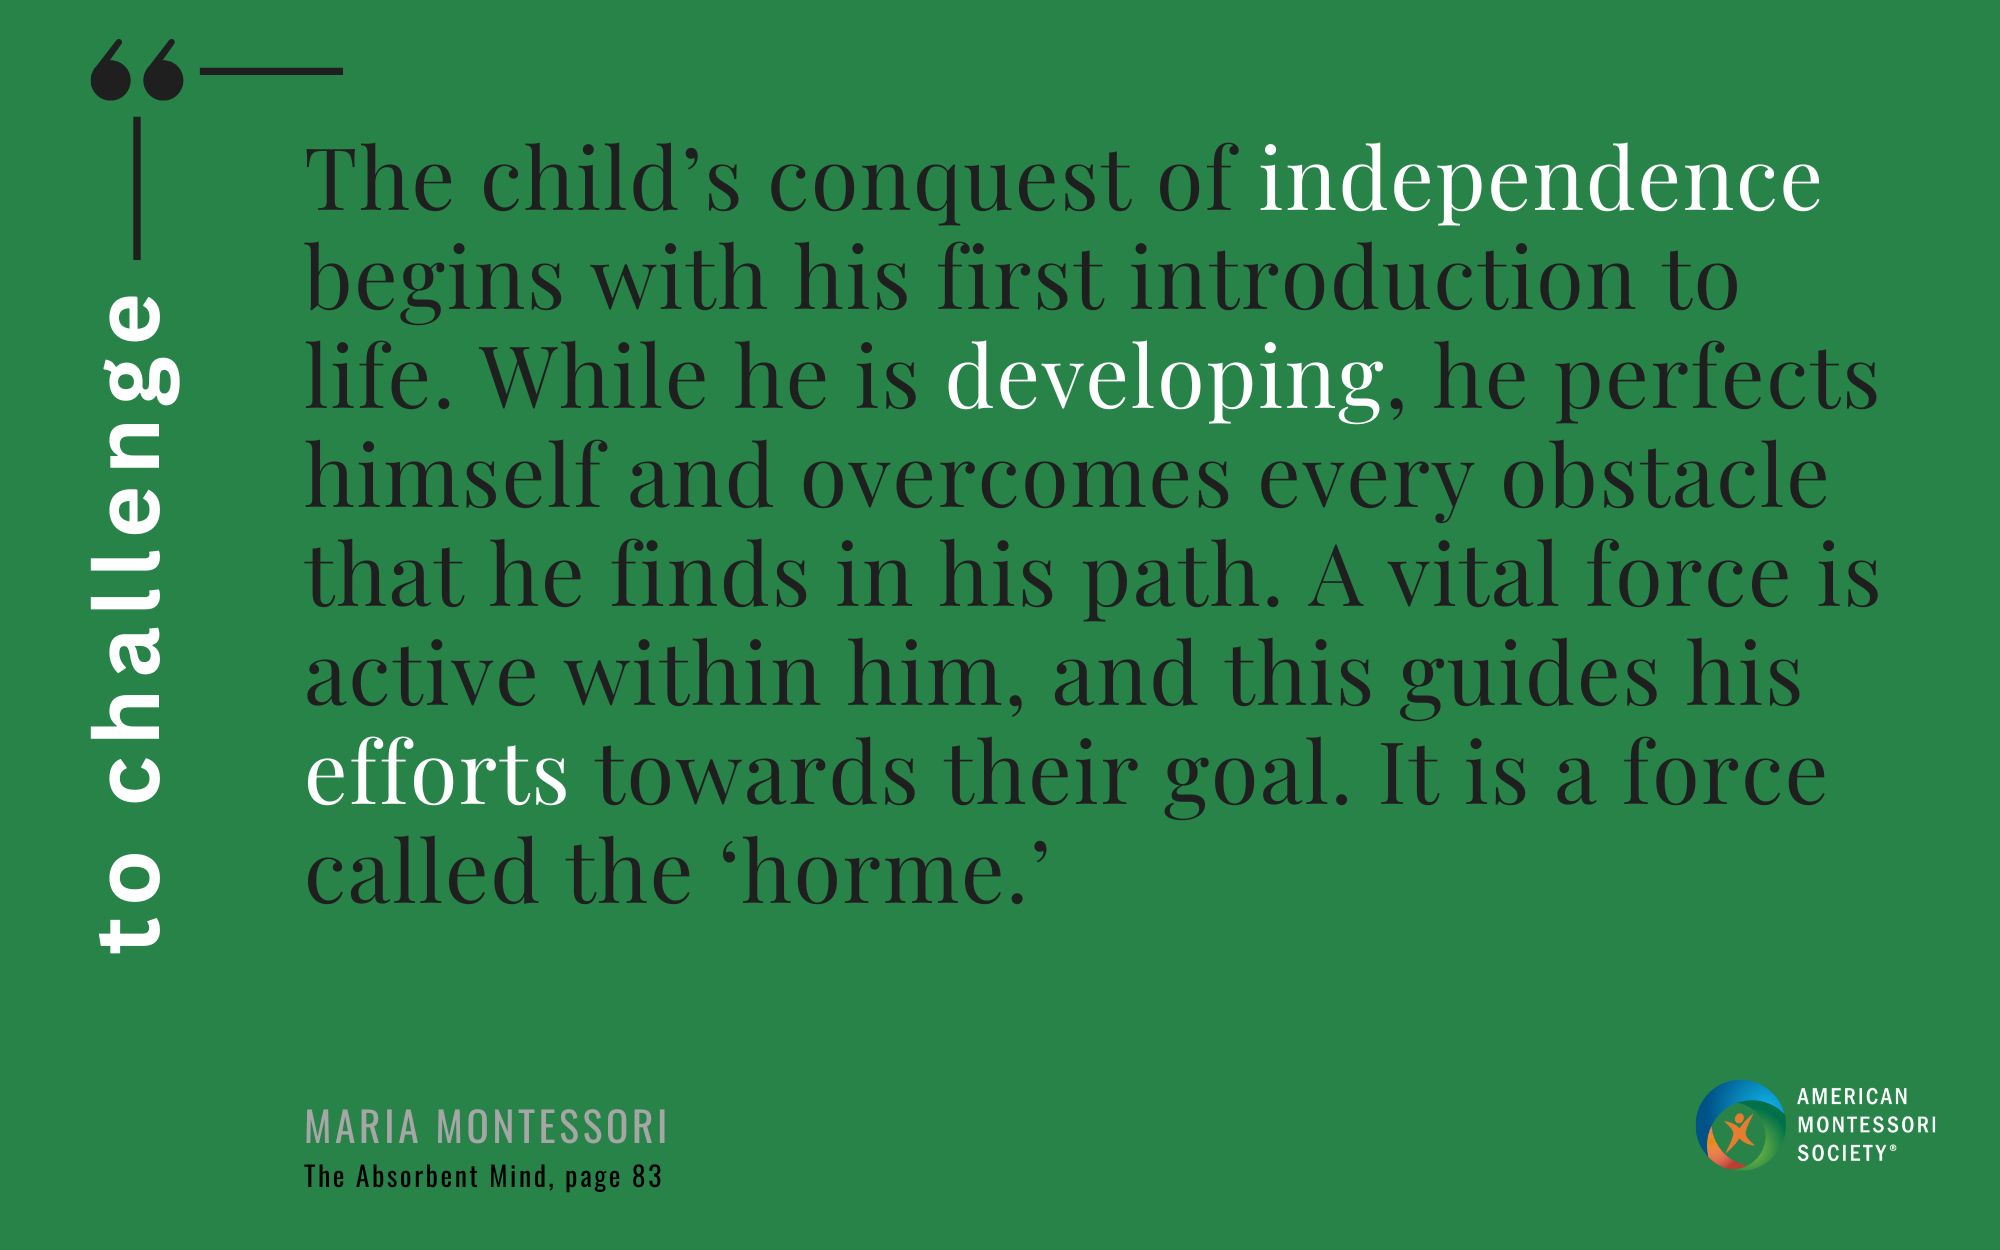 The child’s conquest of independence begins with his first introduction to life. While he is developing, he perfects himself and overcomes every obstacle that he finds in his path. A vital force is active within him, and this guides his efforts towards their goal. It is a force called the ‘horme.